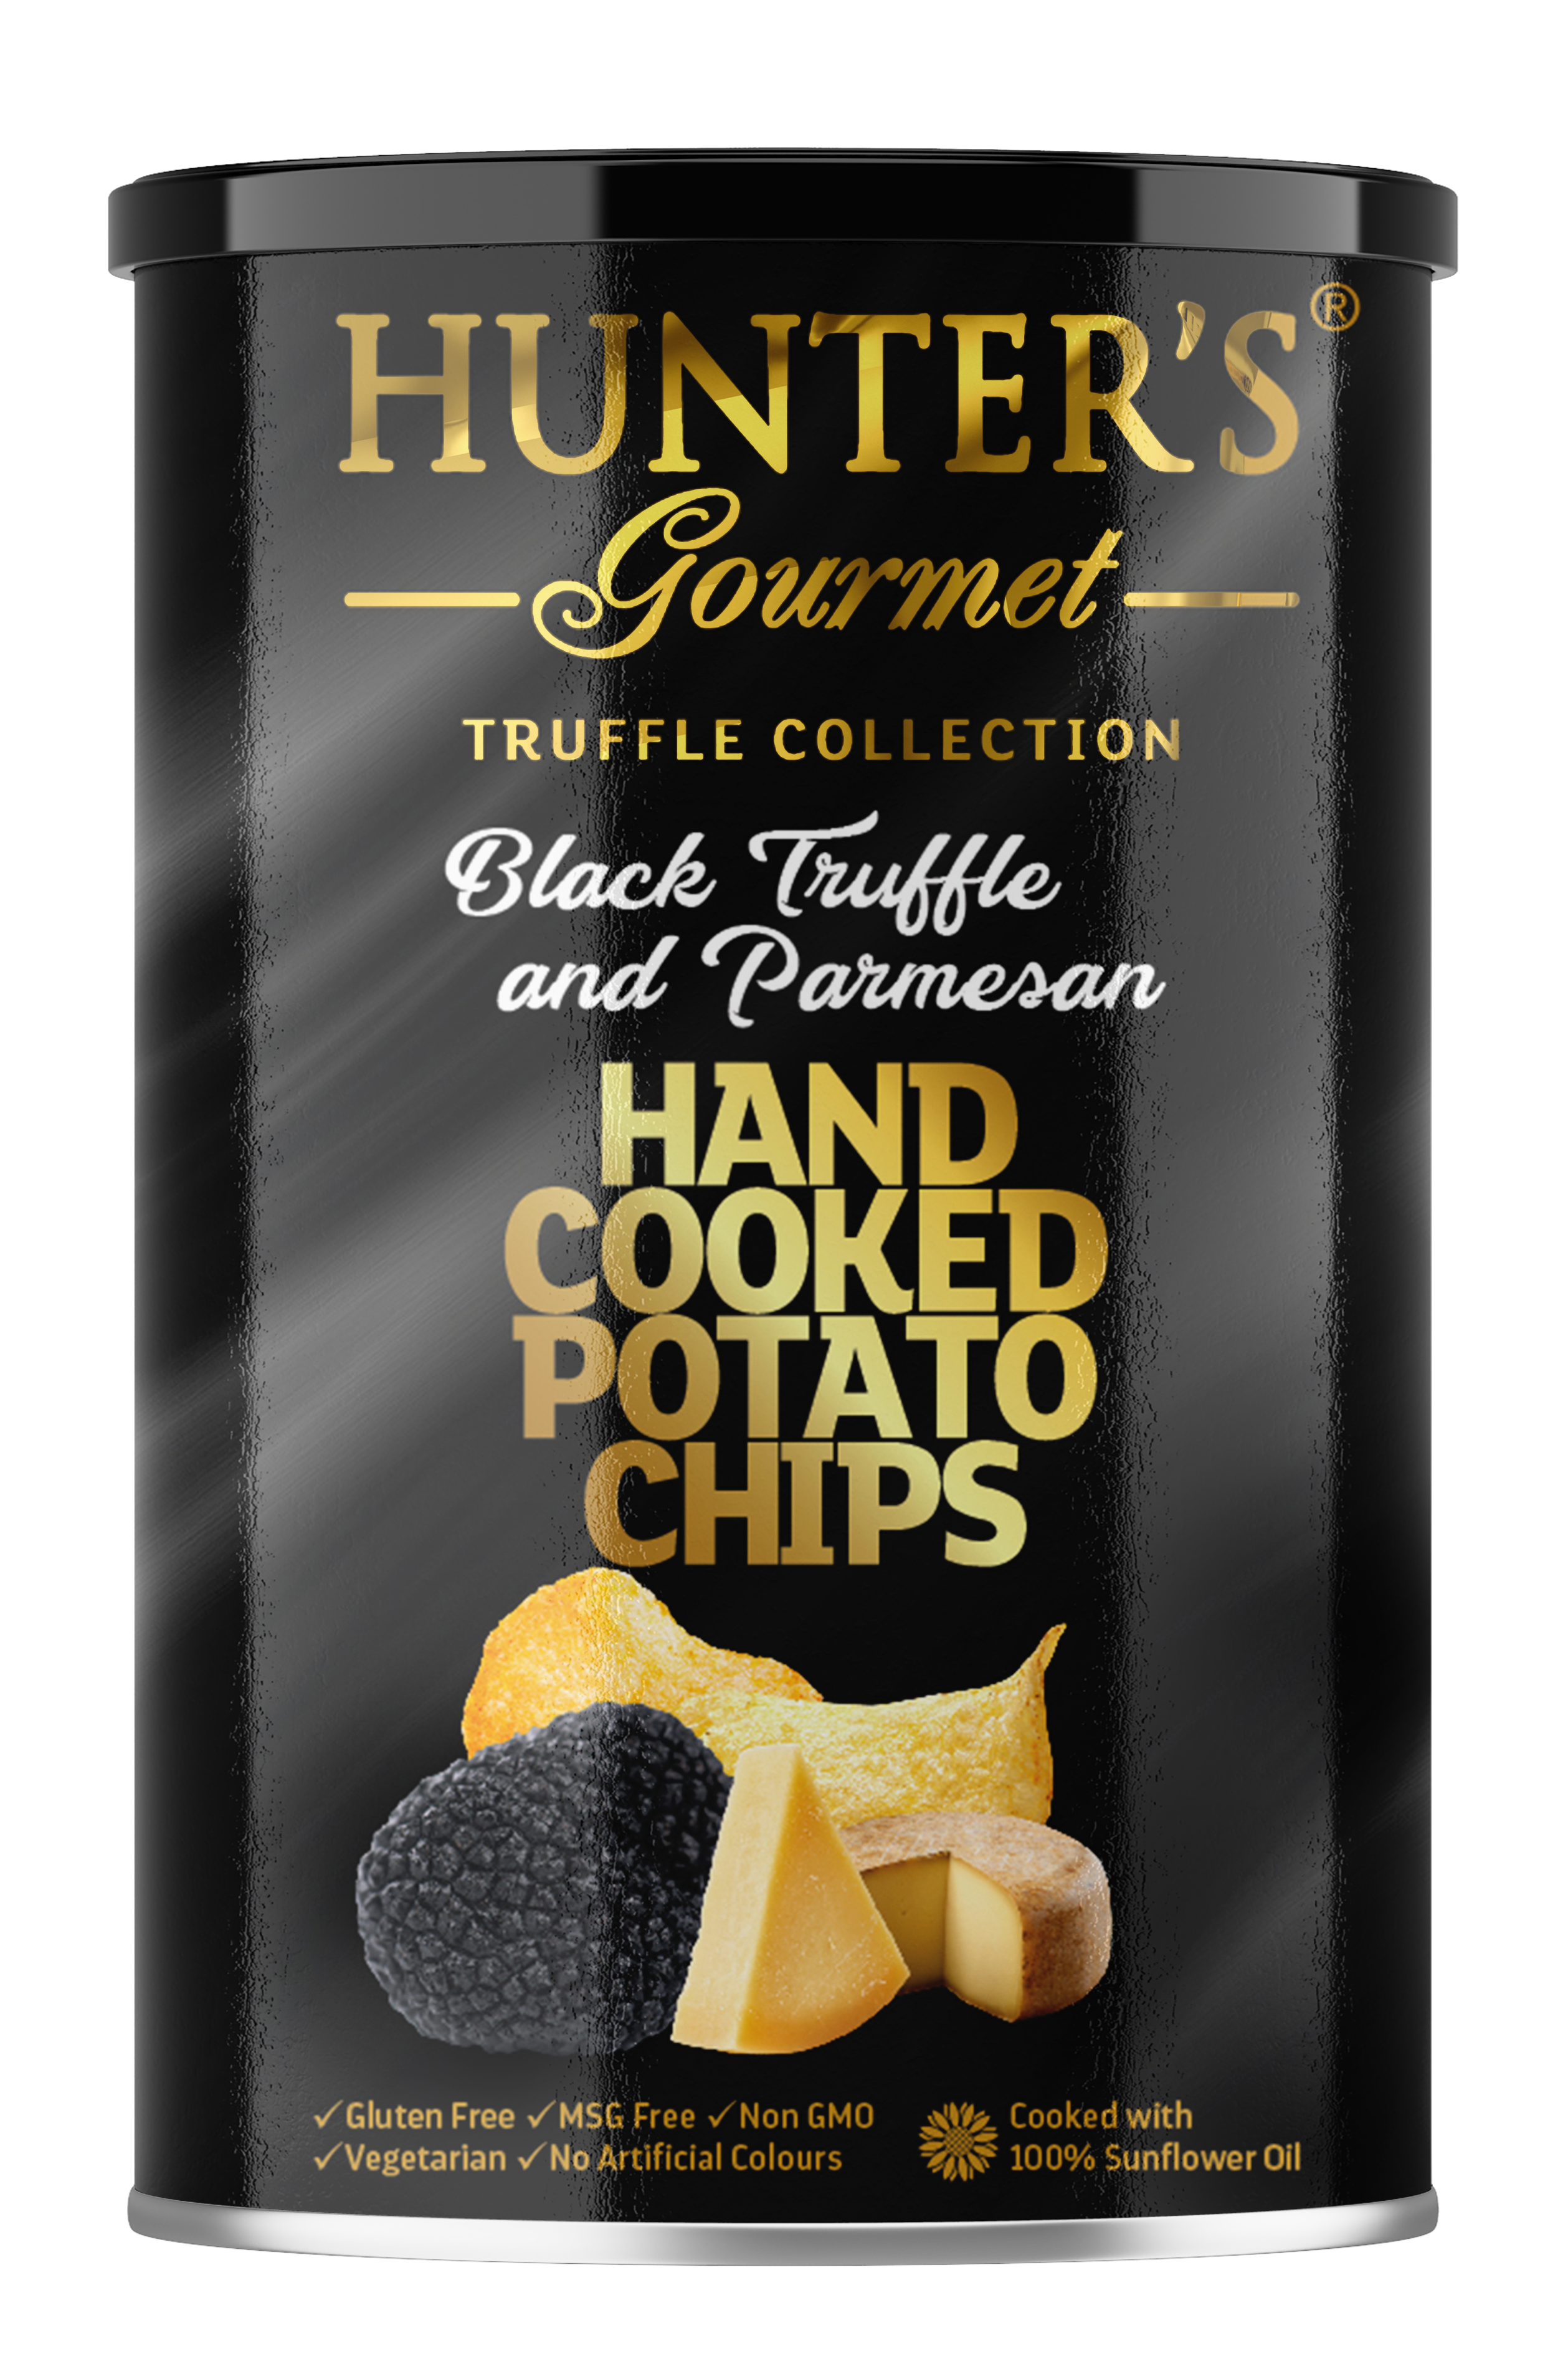 Hunter's Gourmet Hand Cooked Potato Chips Black Truffle and Parmesan 12 units per case 150 g